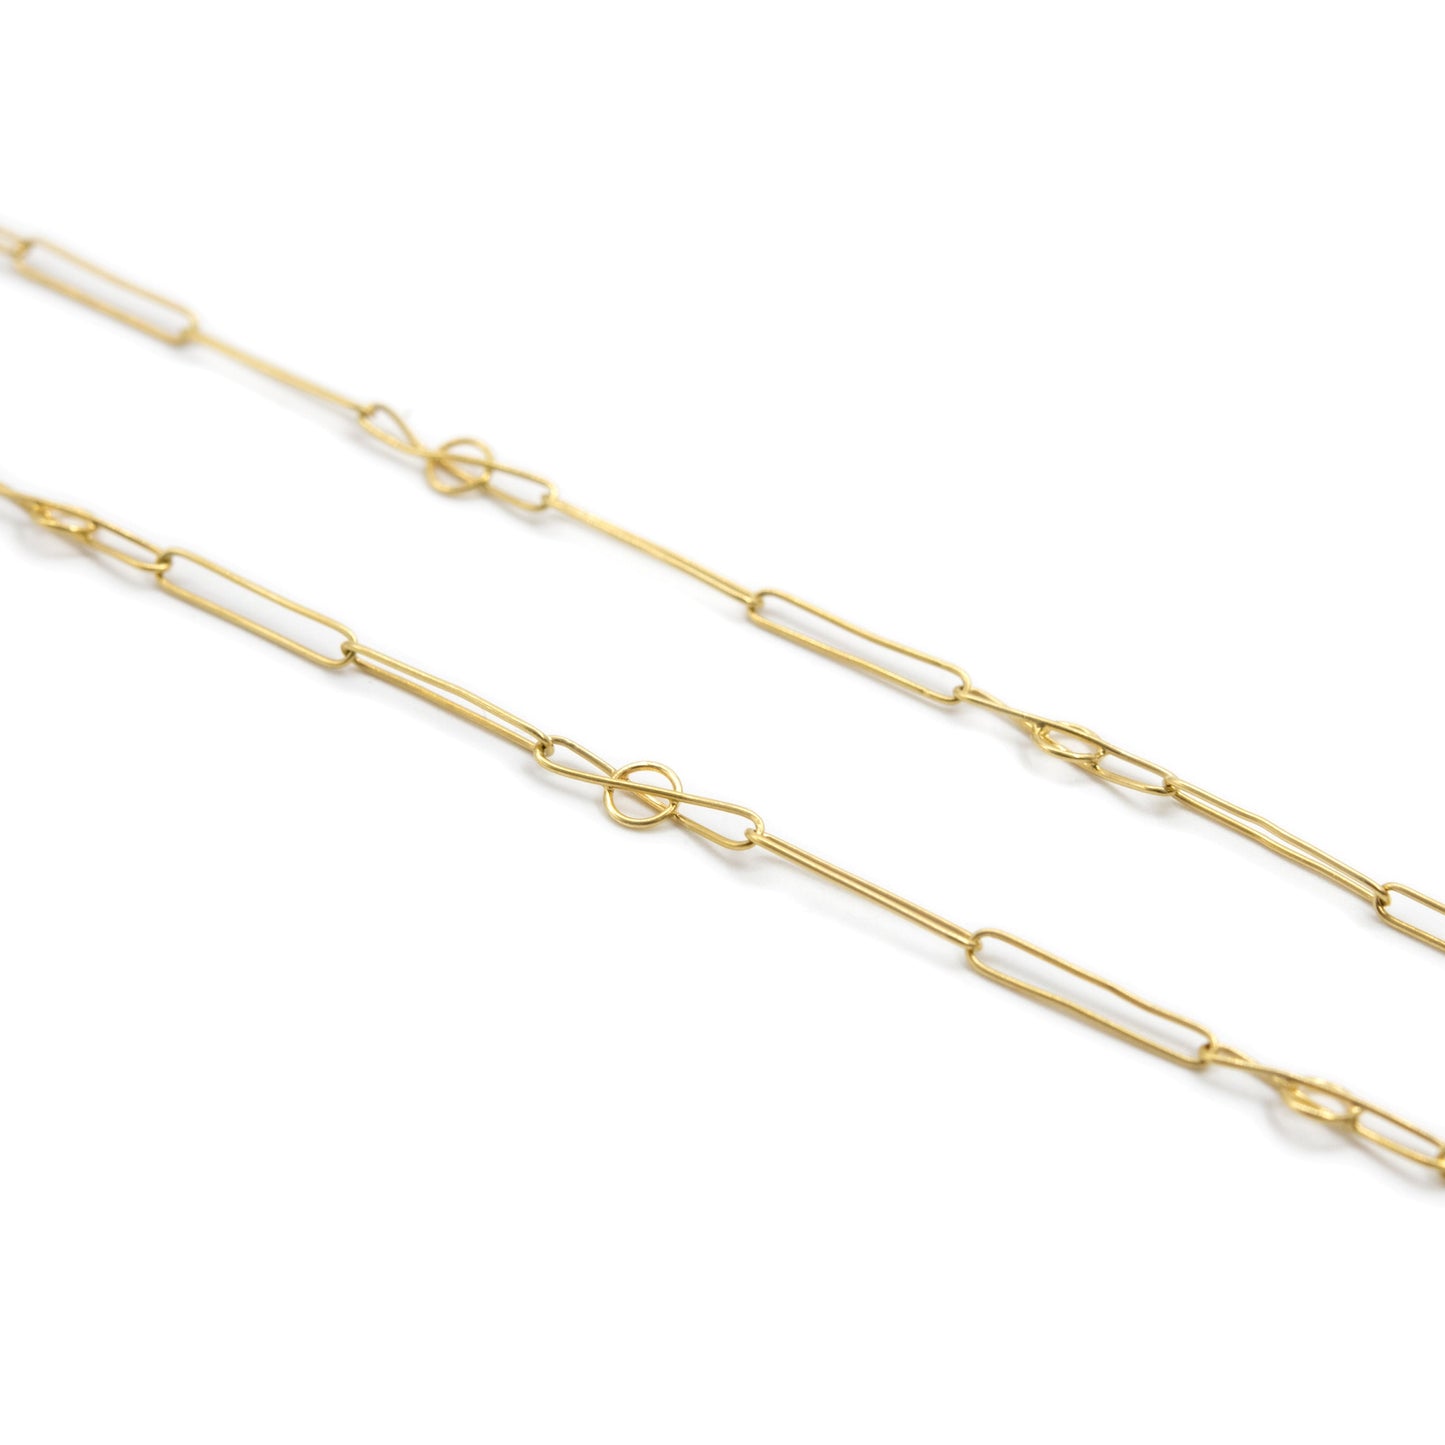 Vintage 18ct Gold Chain Necklaces For Women | Penelope | Vintage jewelry | Lil Milan